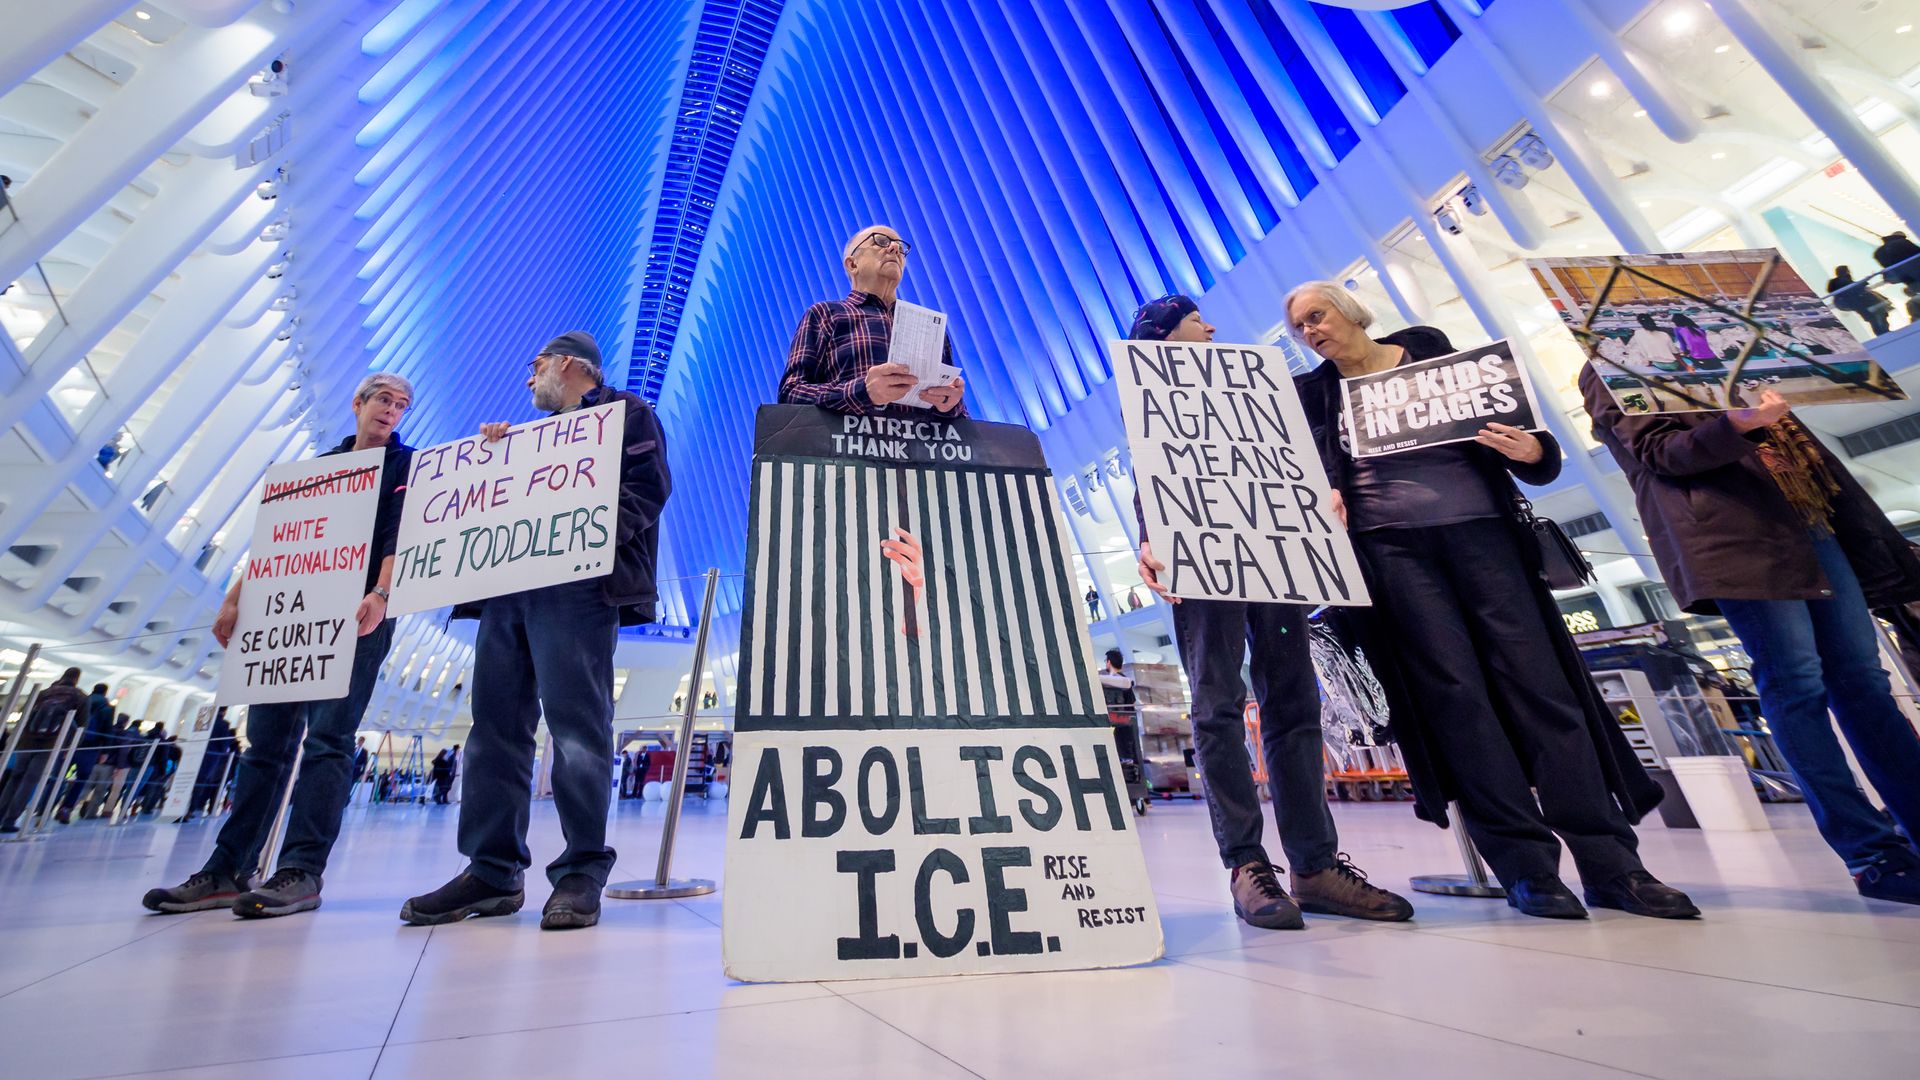 Protestors hold signs that read "abolish ICE" and other anti-ICE language